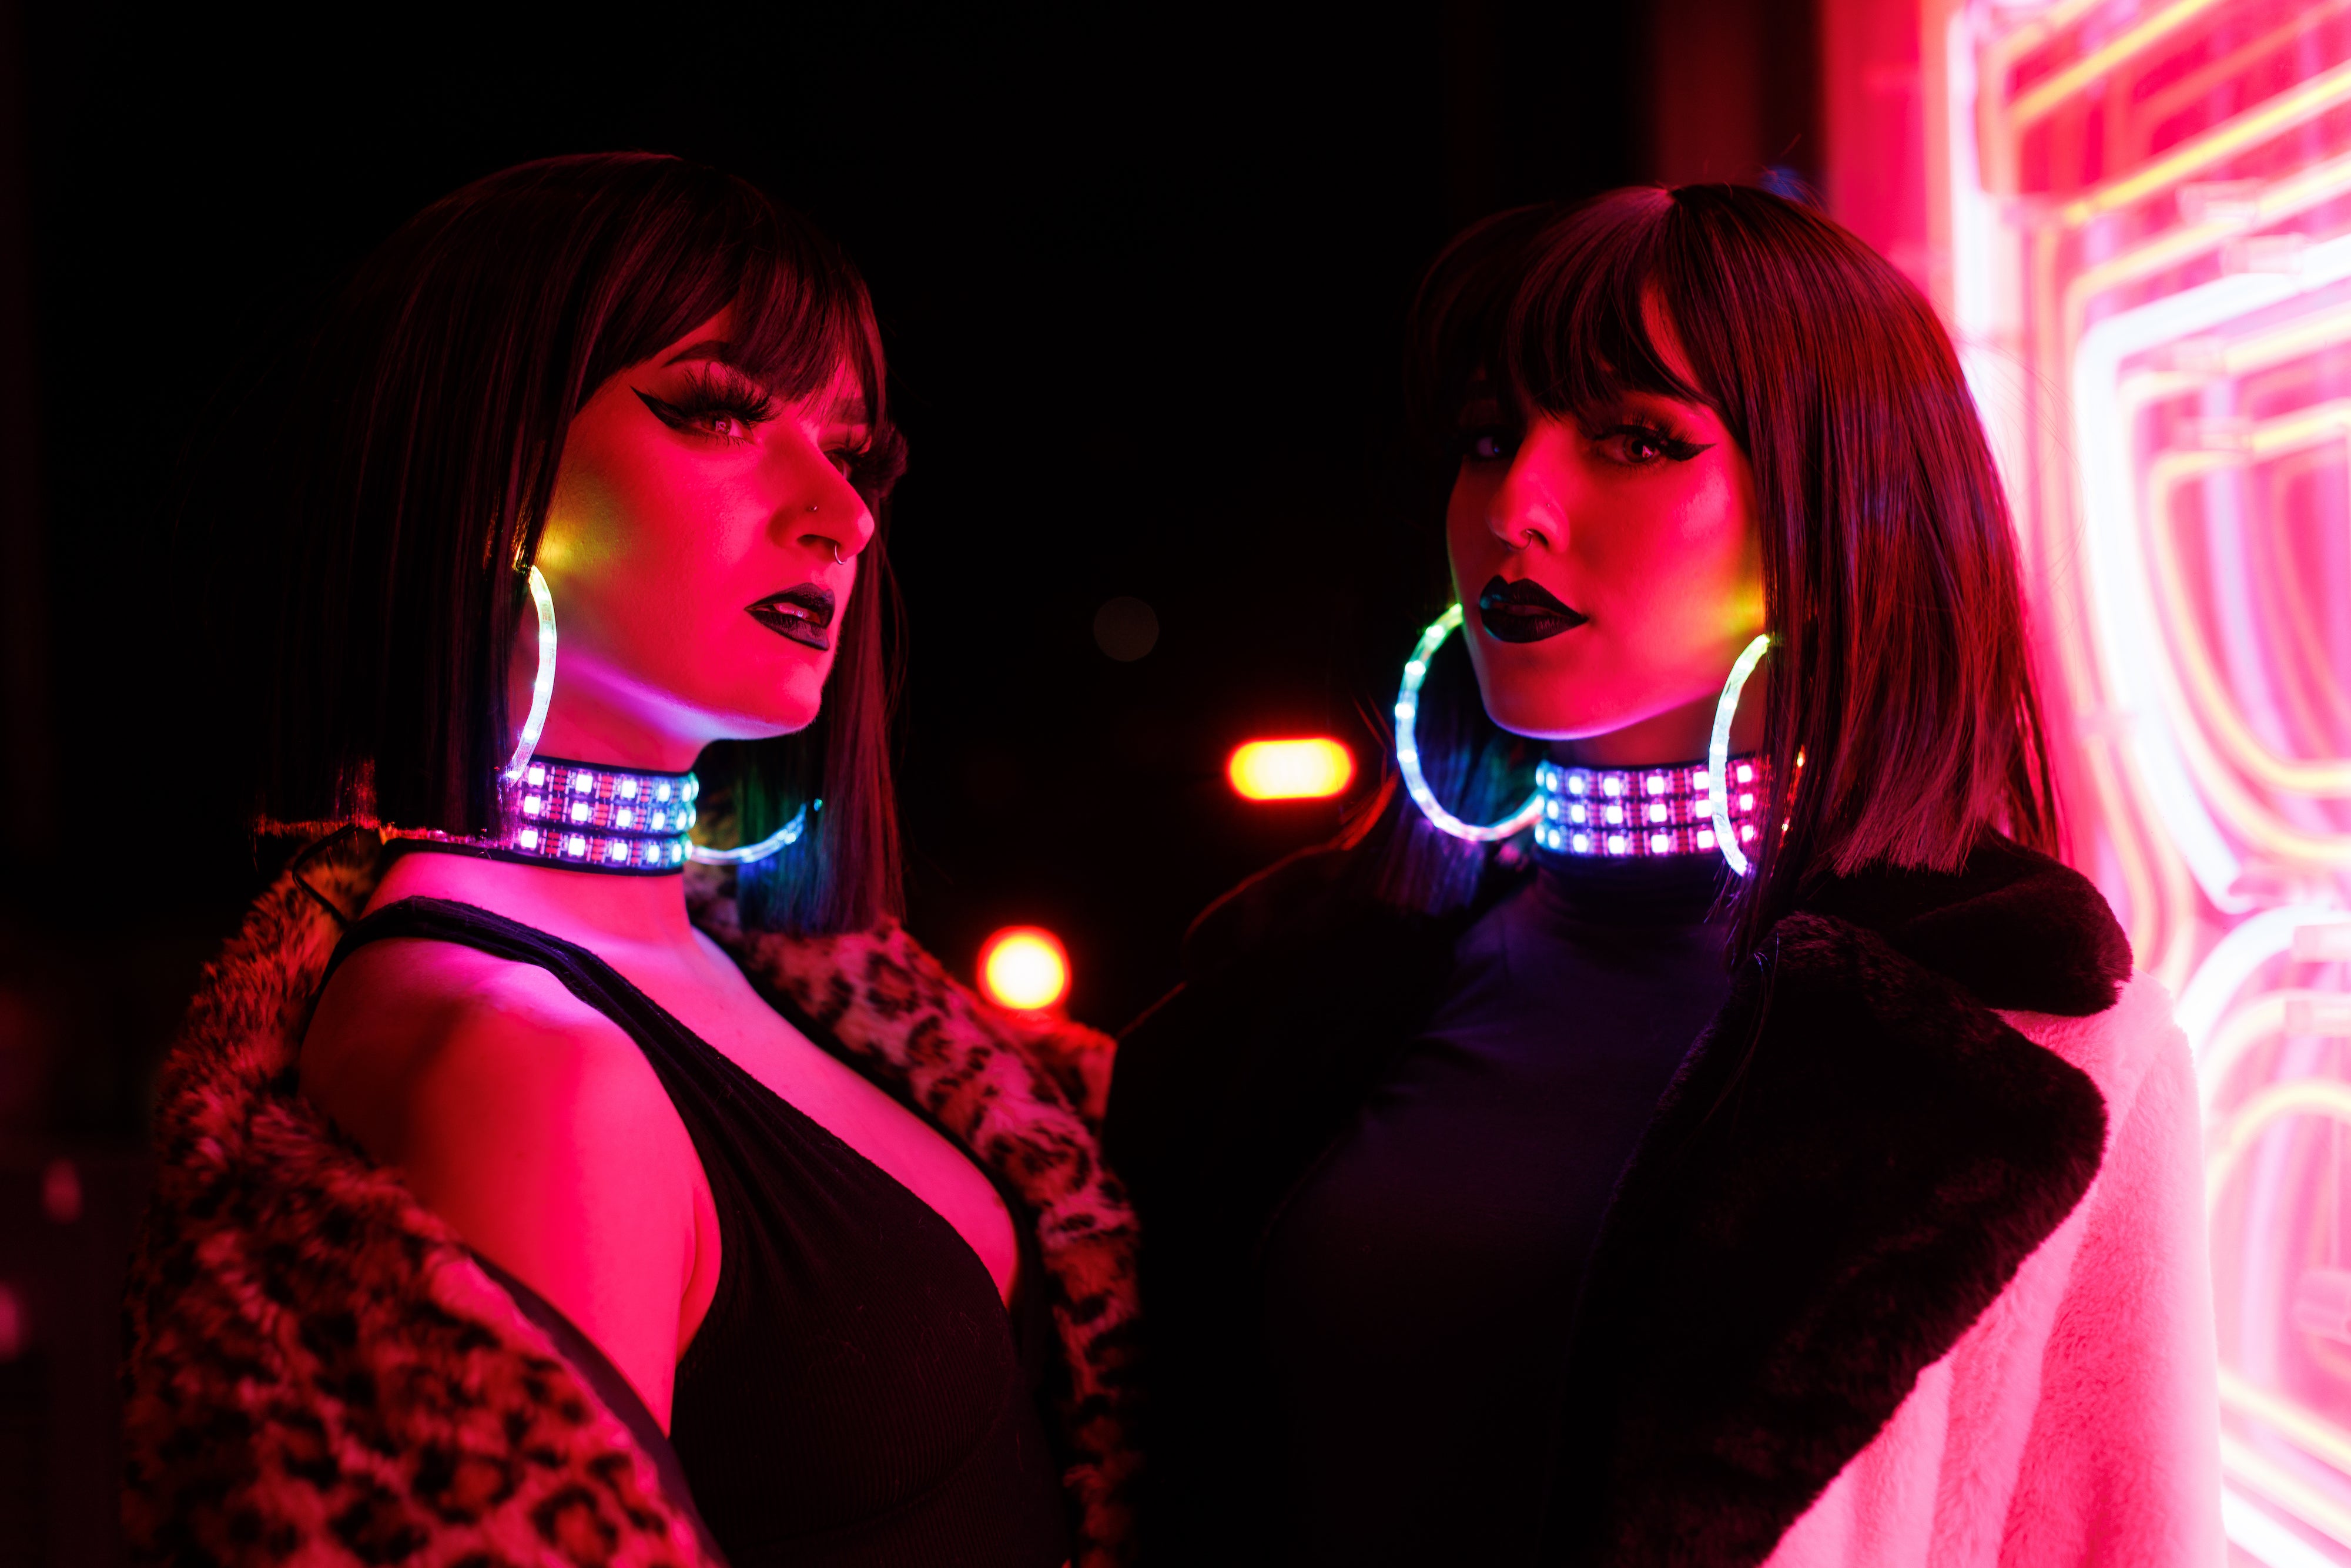 two models wearing led accessories & chic fur coats standing near a pink neon sign